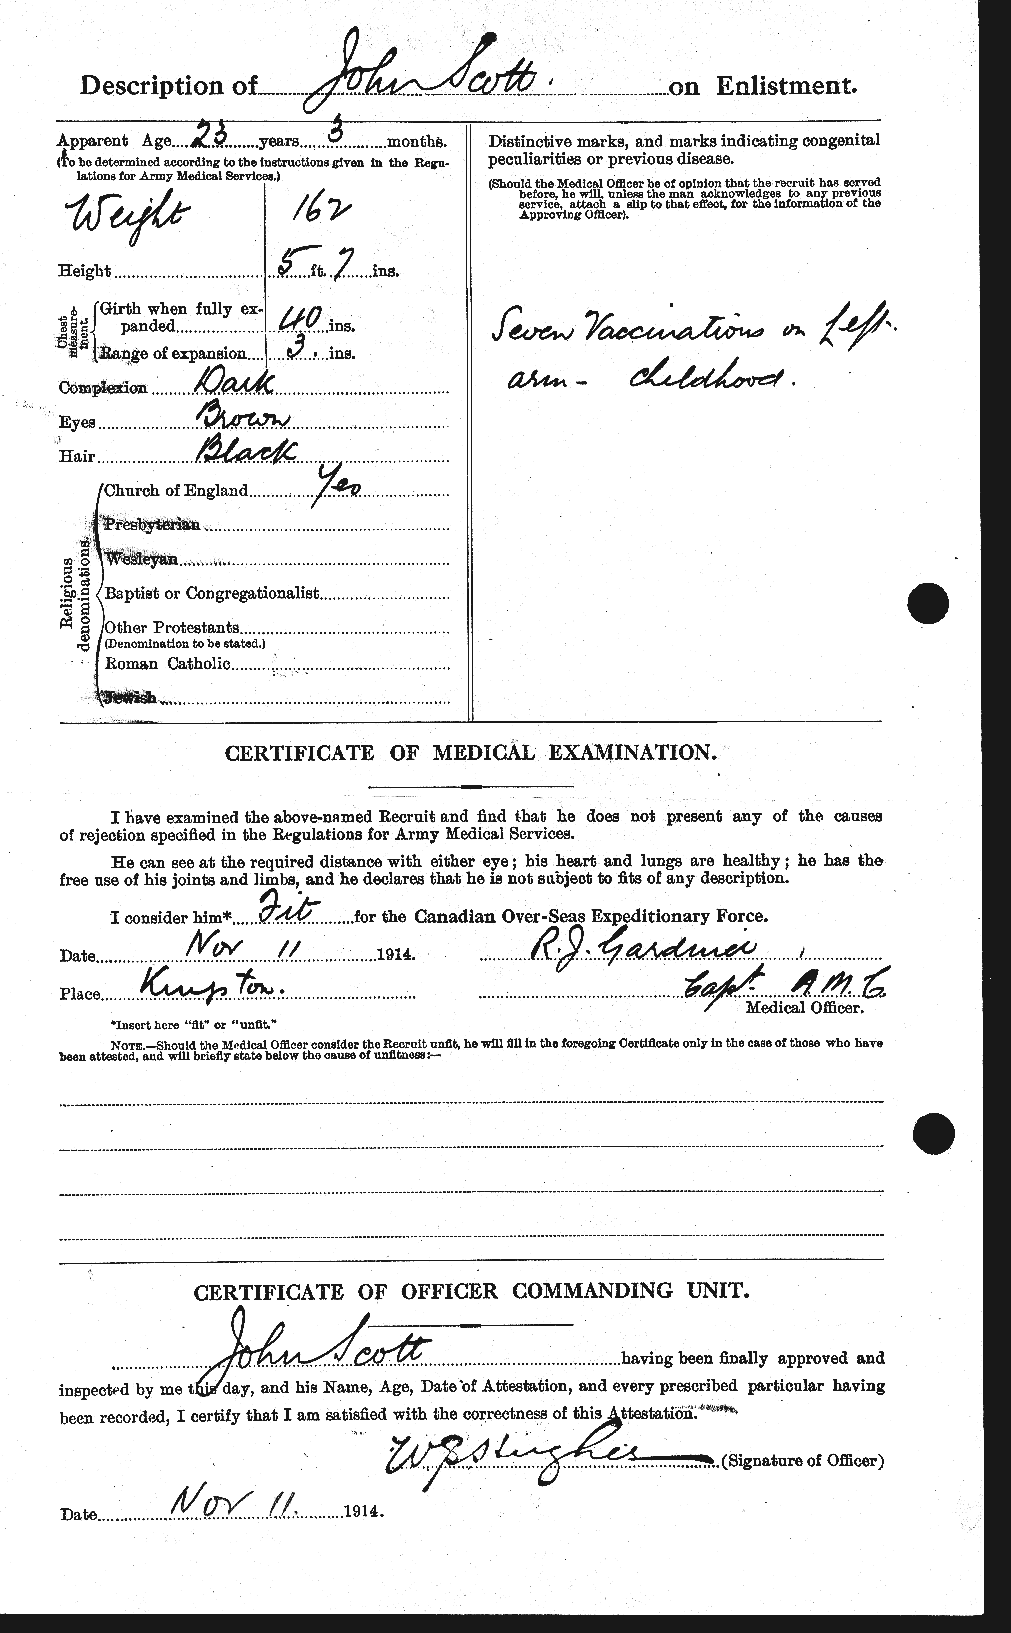 Personnel Records of the First World War - CEF 084905b